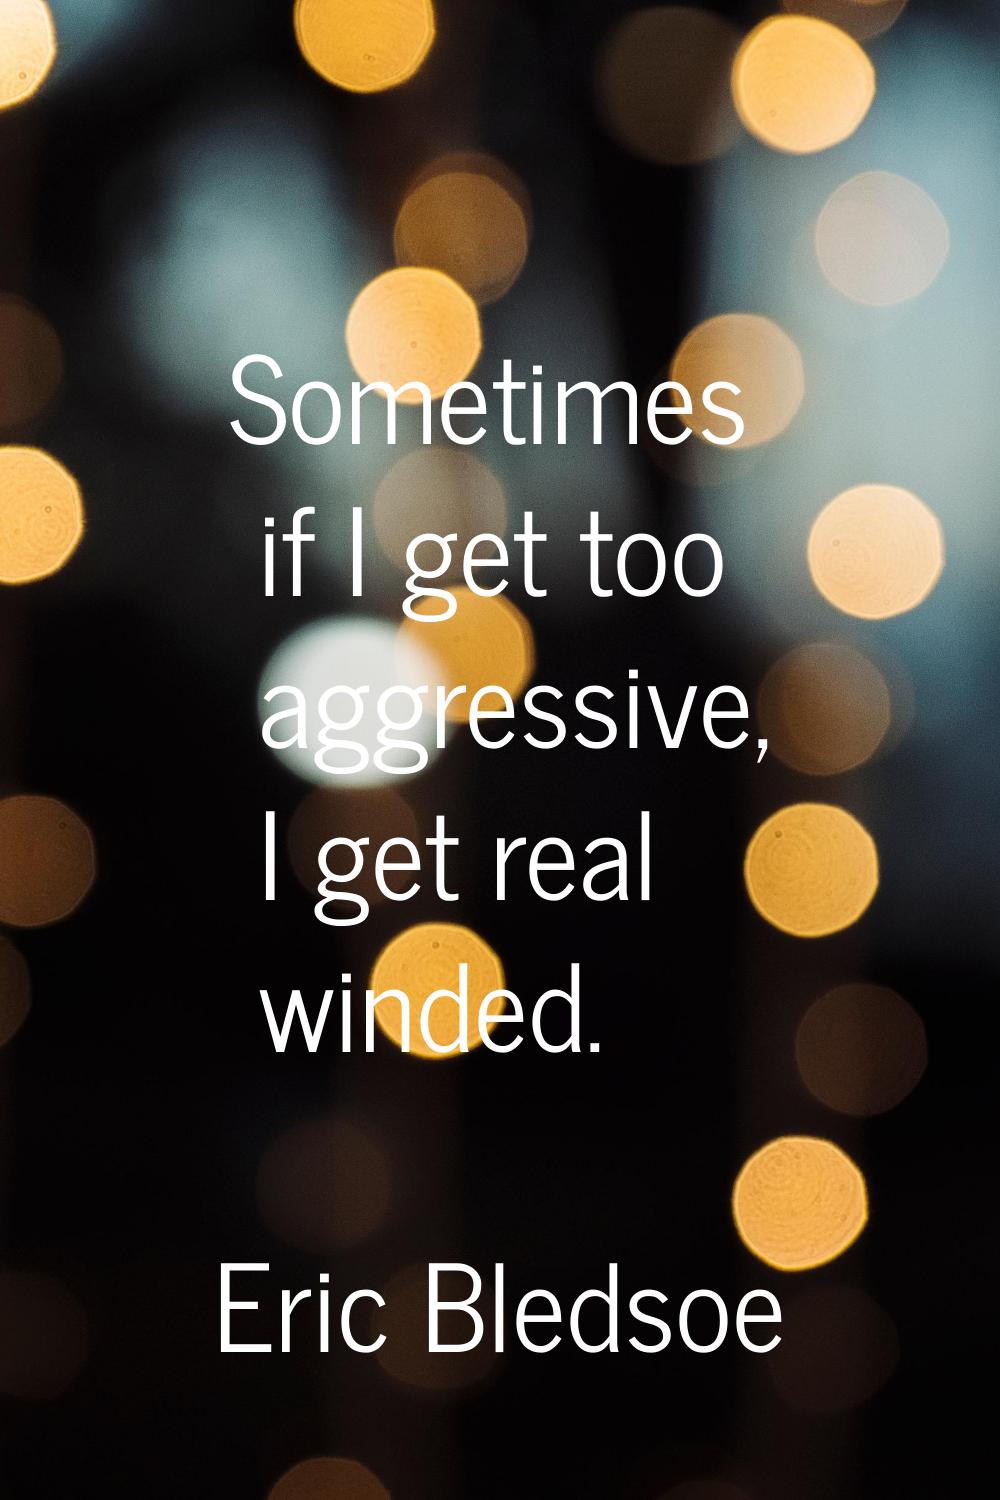 Sometimes if I get too aggressive, I get real winded.